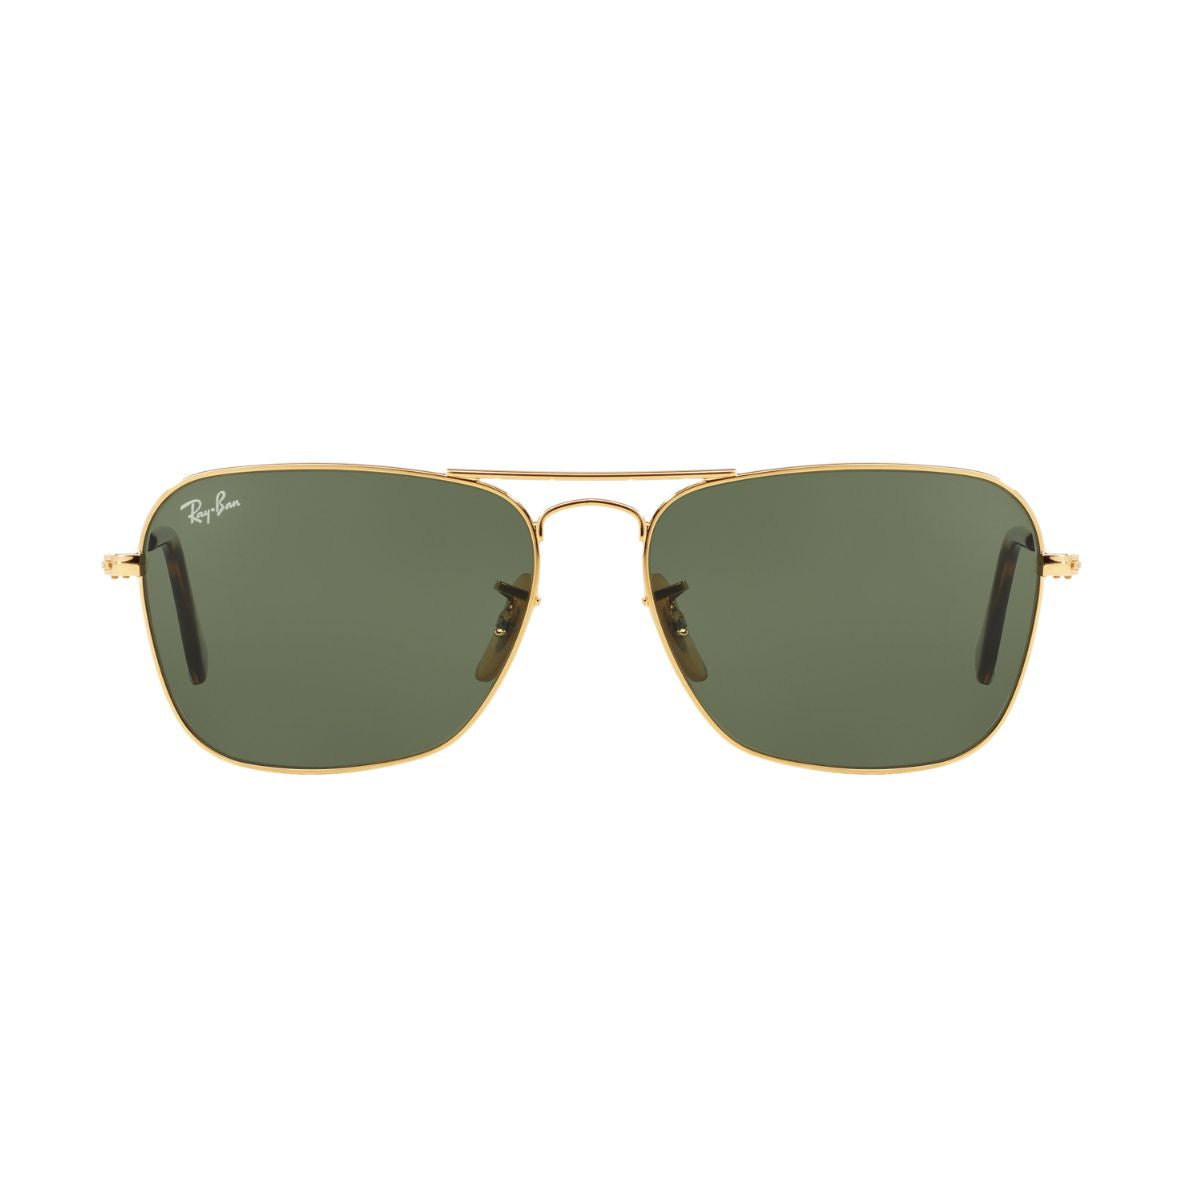 "Rayban 3136 181 UV Protection Sunglasses For Men's At Optorium"